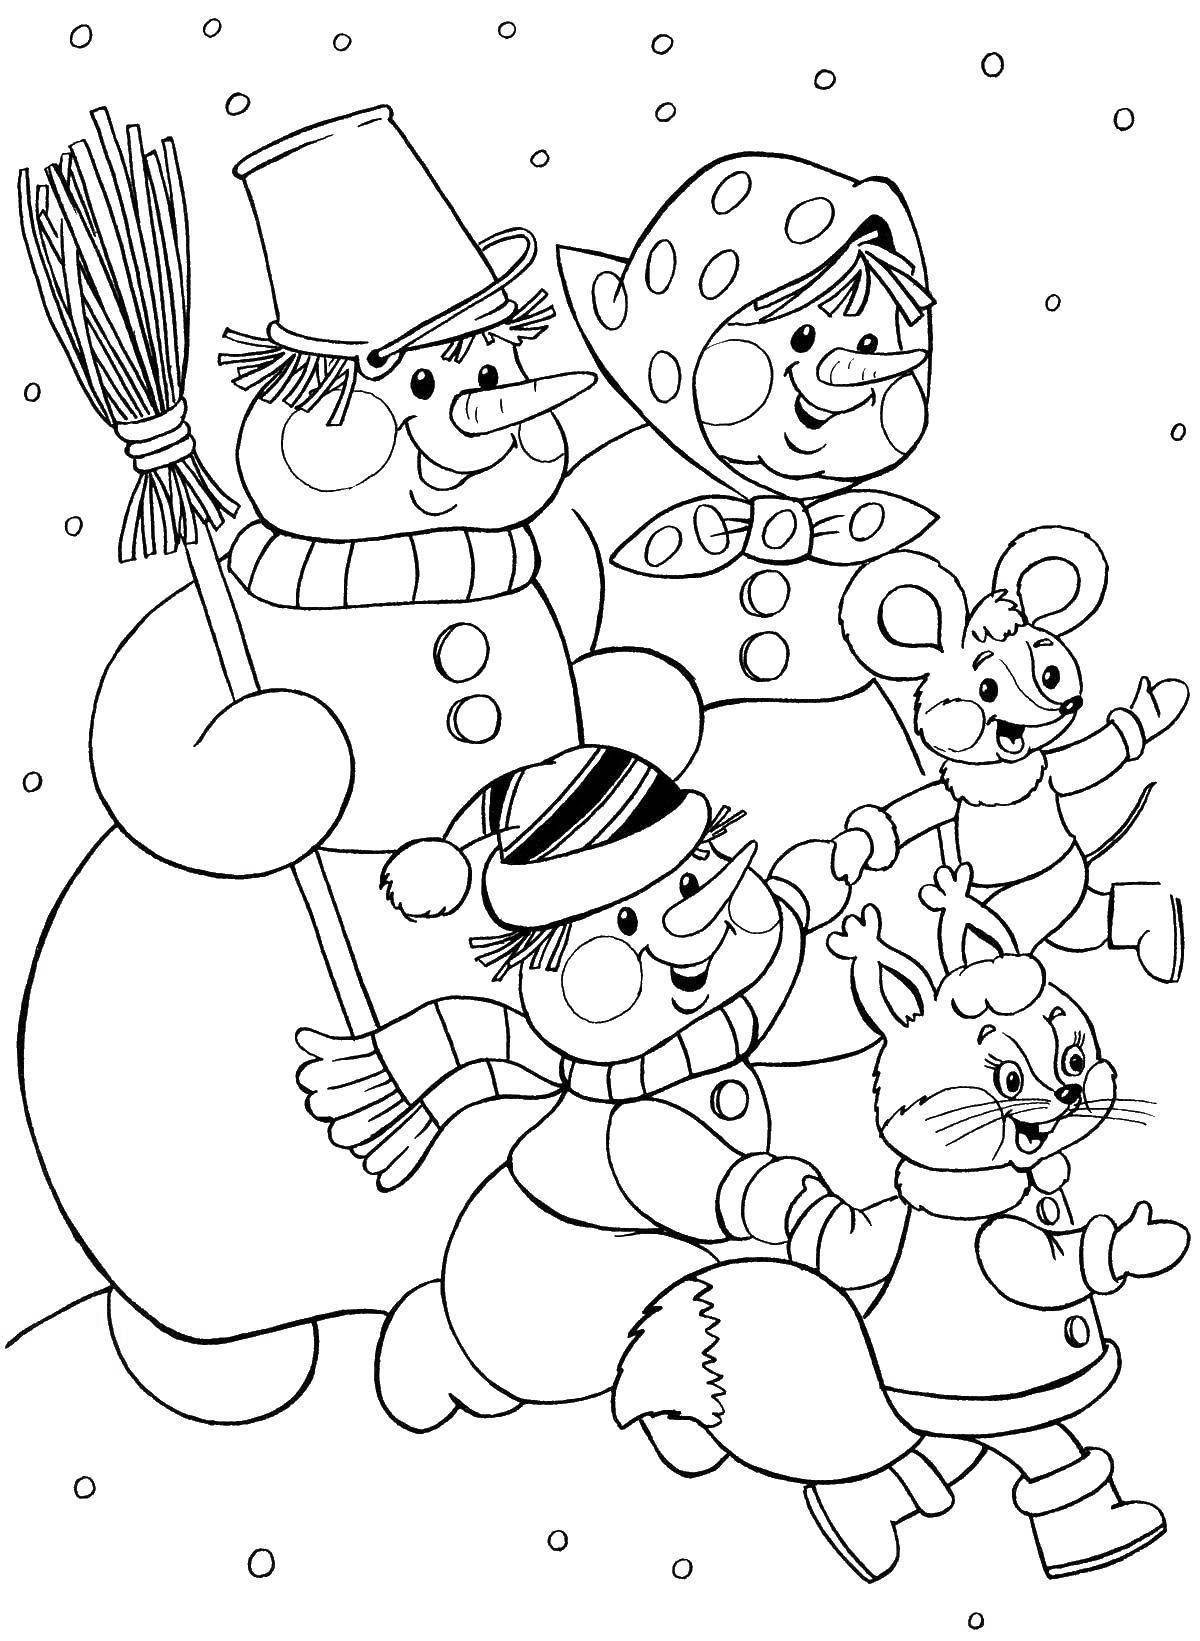 Cute funny snowman coloring book for kids